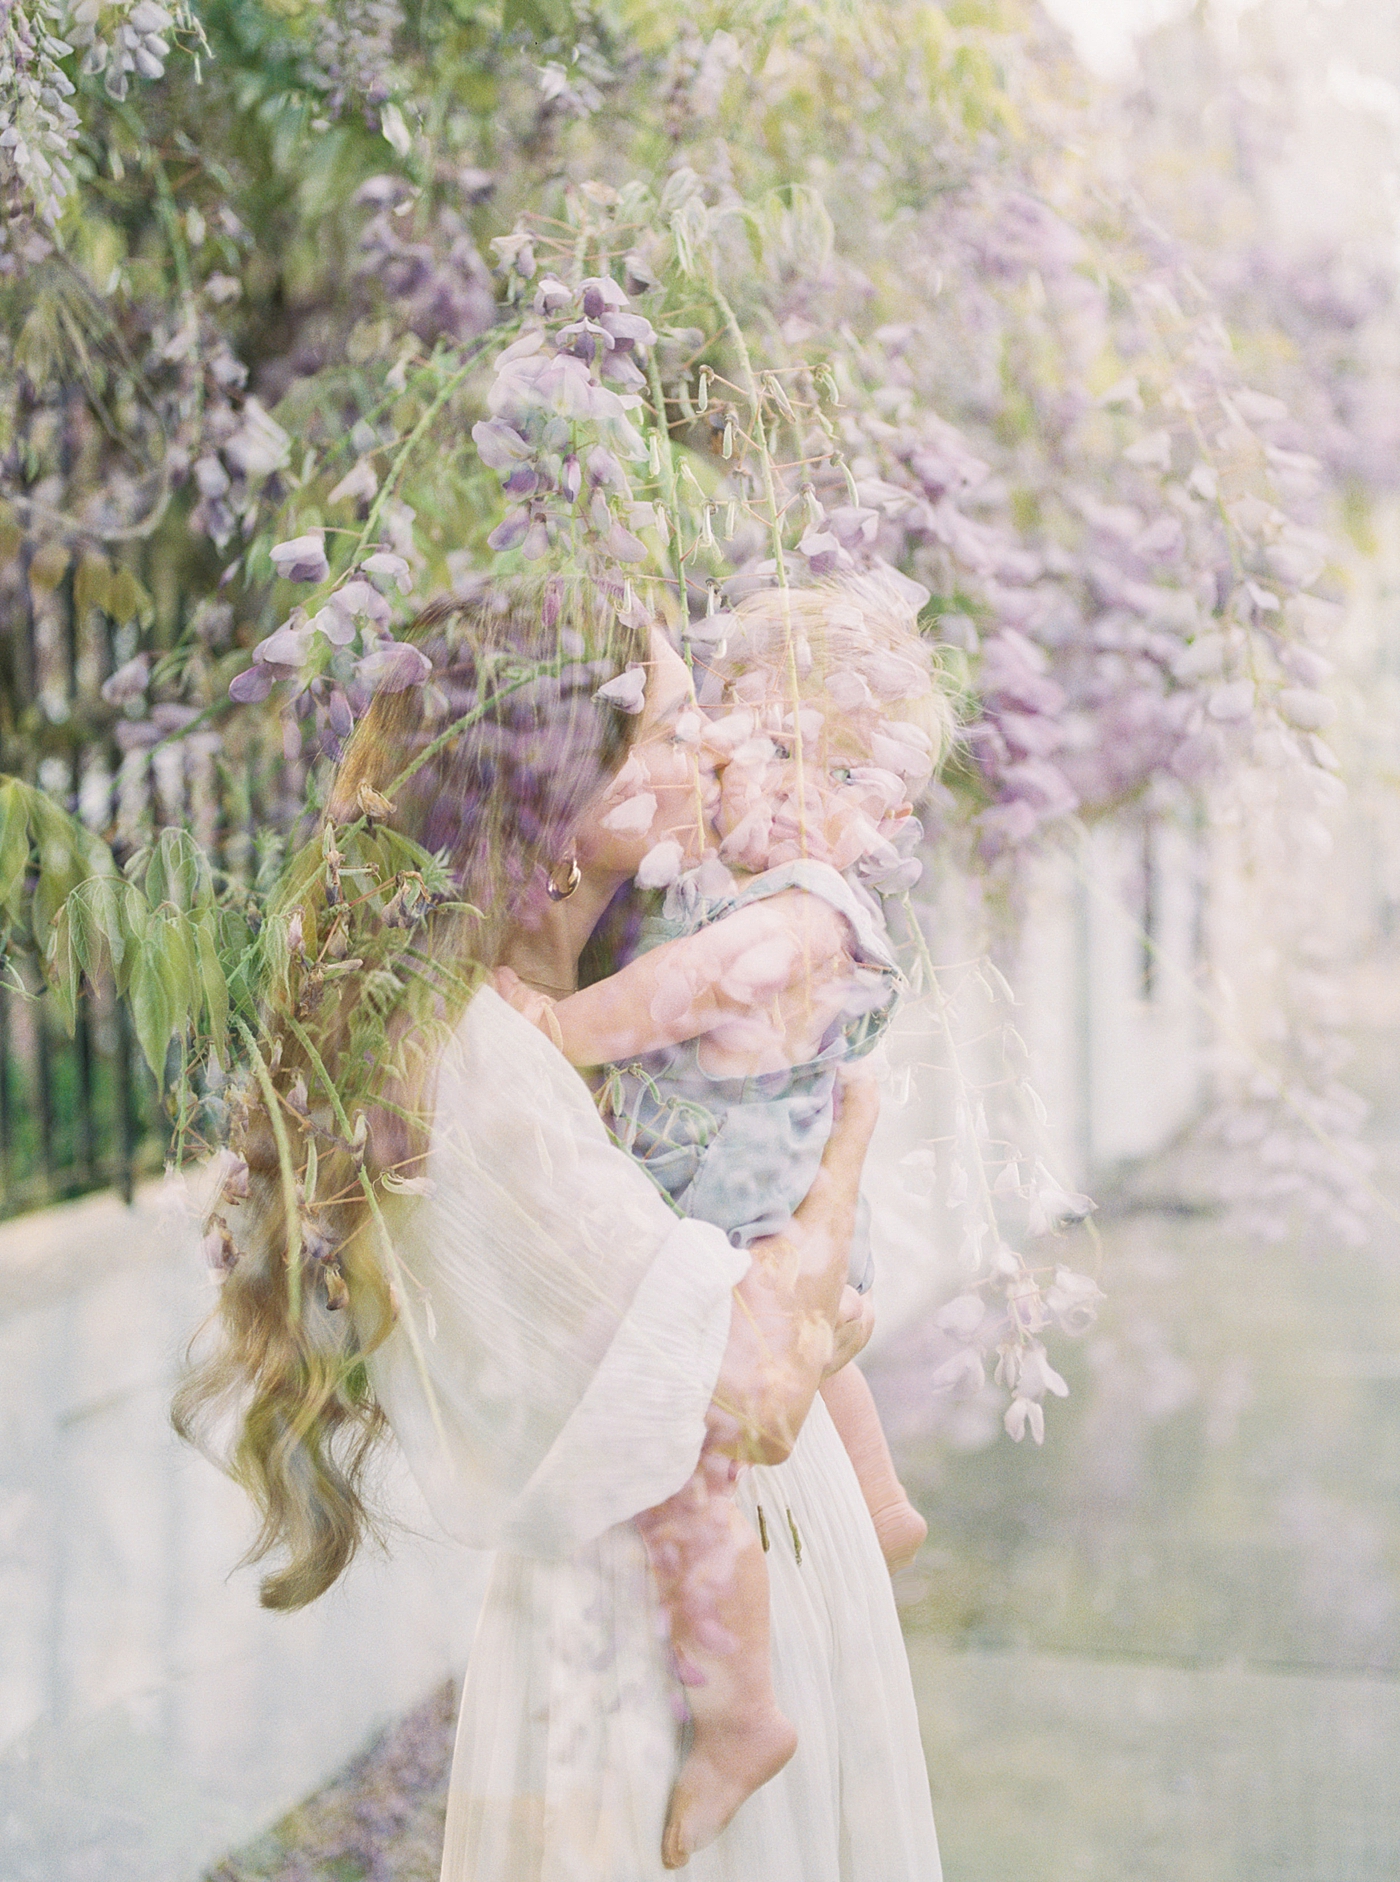 Double exposure image of mom holding her baby with wisteria in the background | Image by Caitlyn Motycka